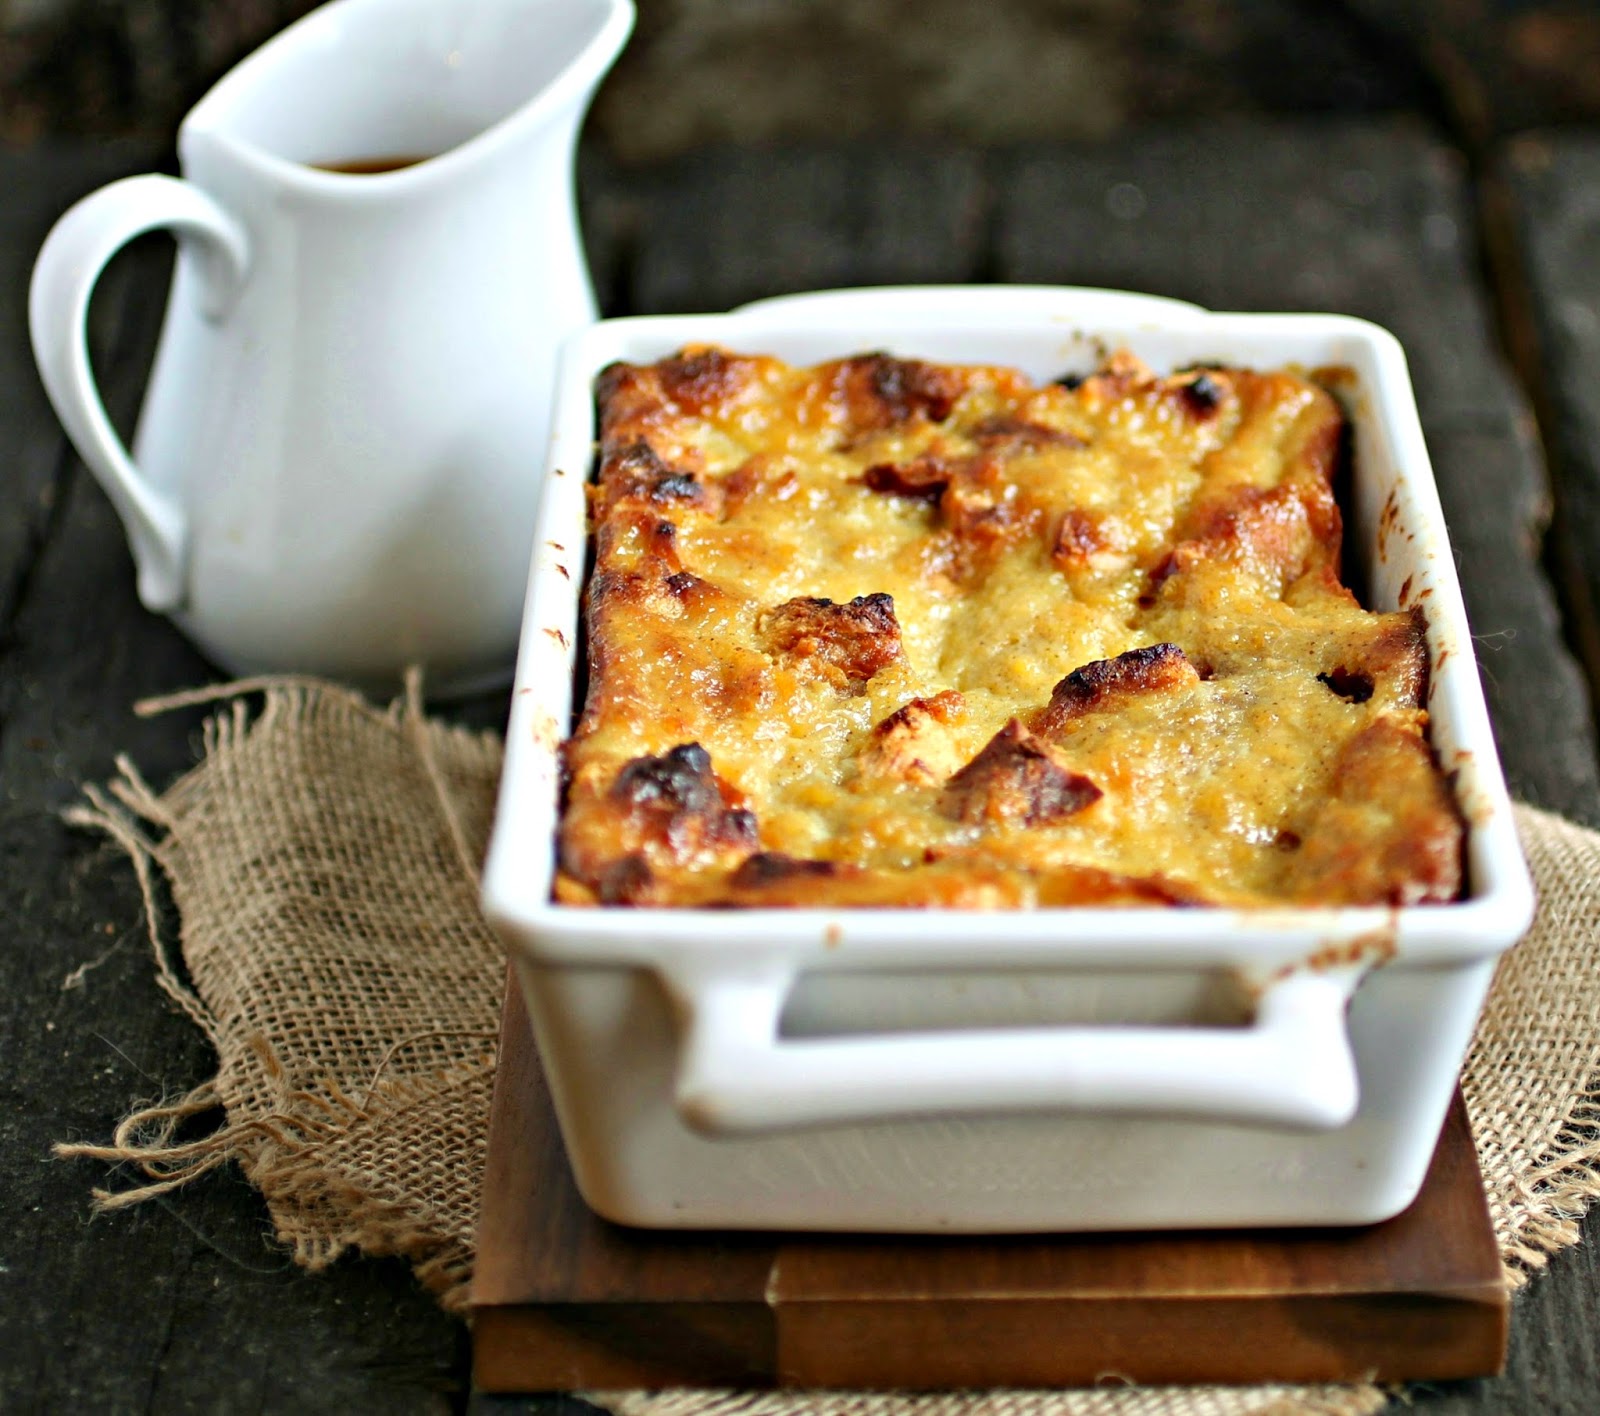 Cinnamon Bread Pudding with Salted Chocolate Rum Sauce